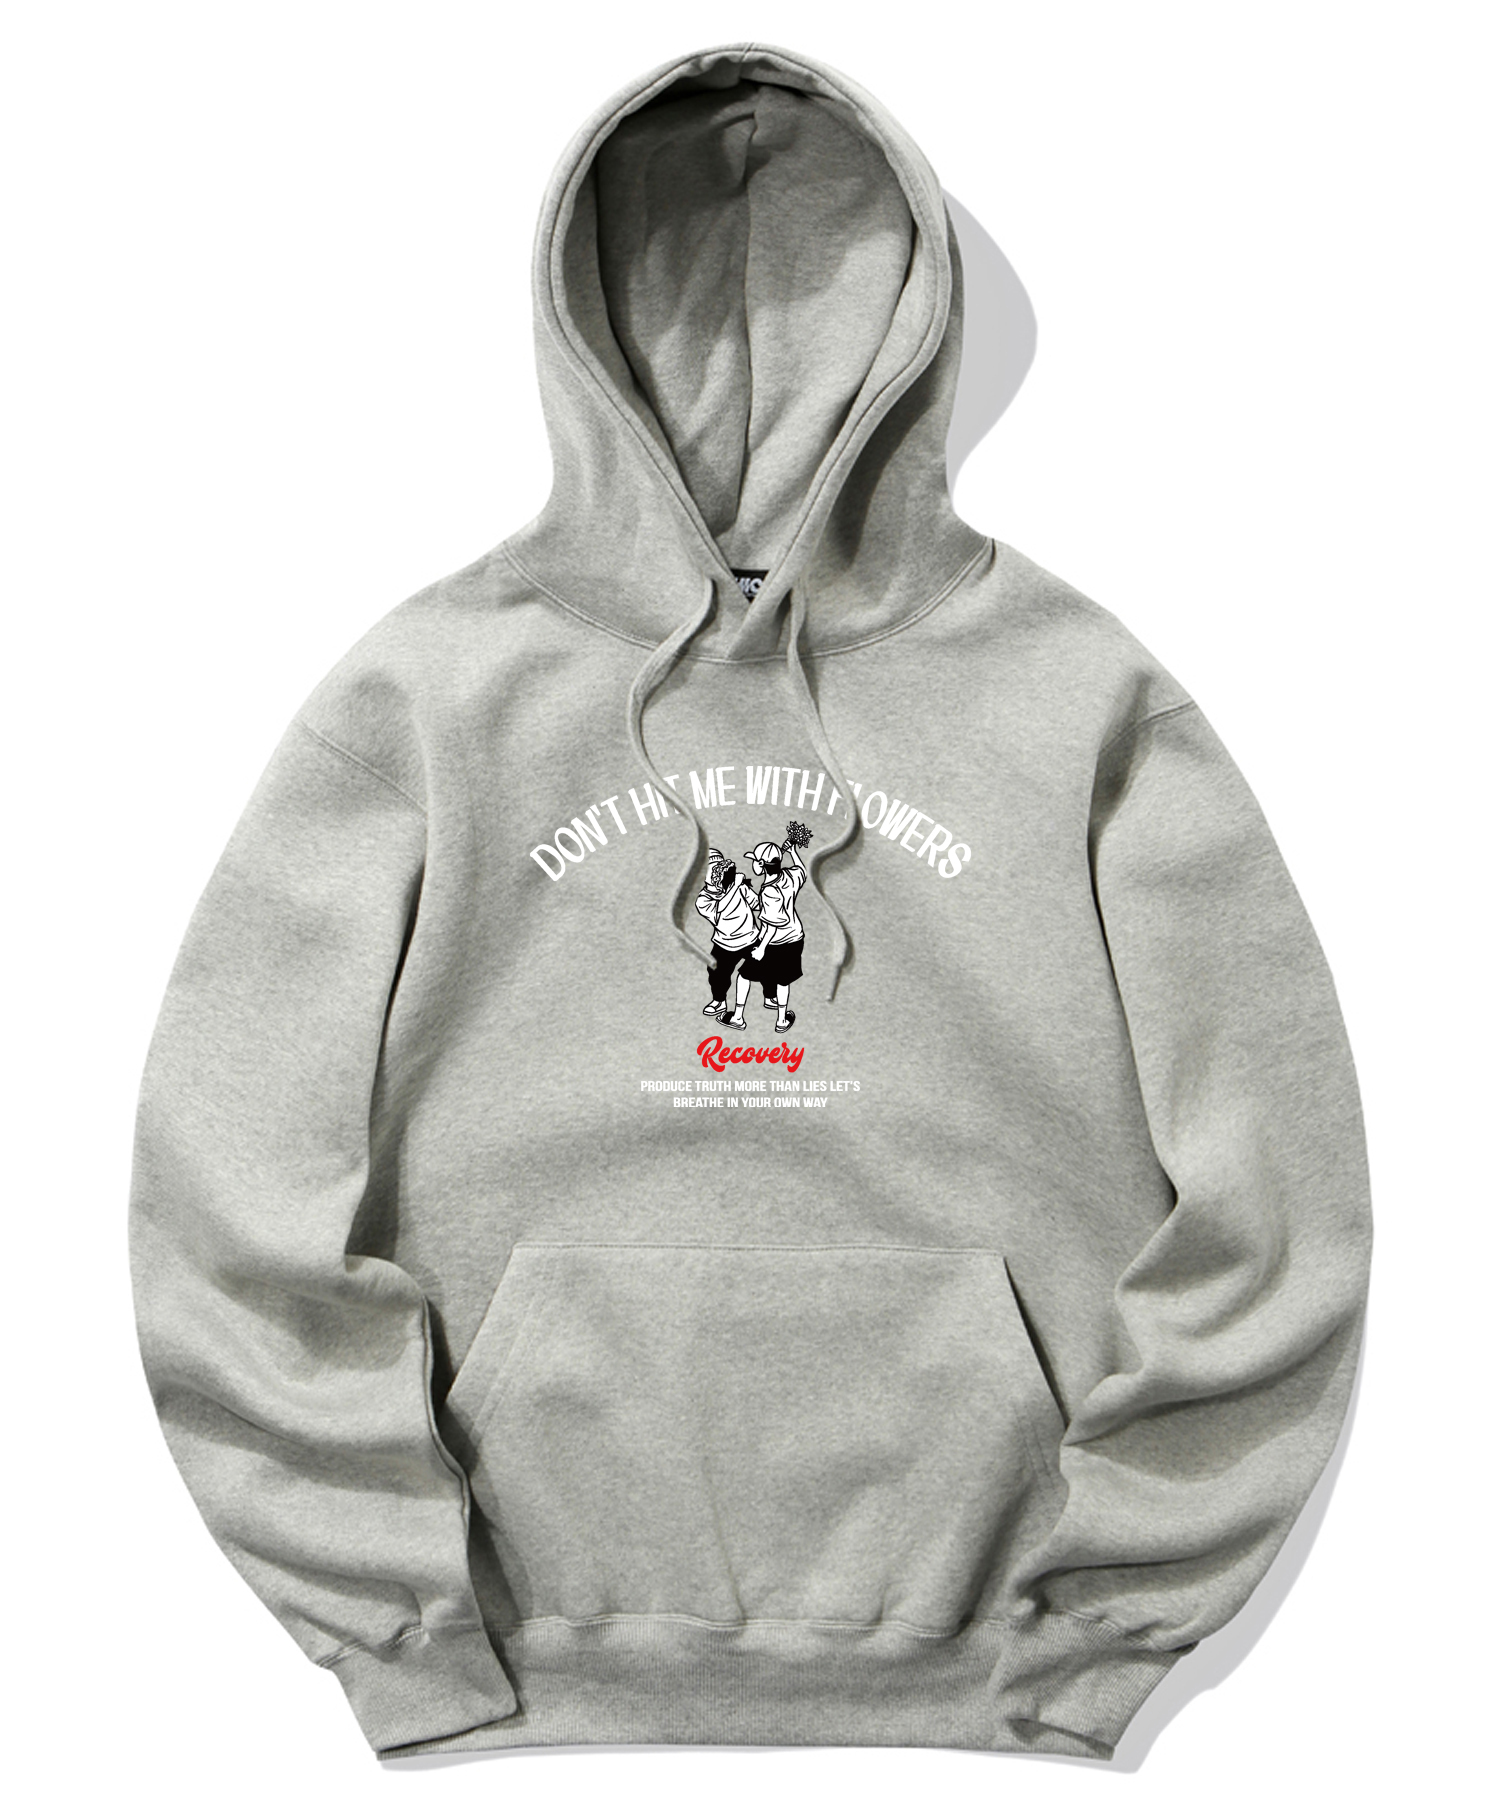 DON’T HIT ME WITH FLOWERS GRAPHIC HOODIE - GRAY